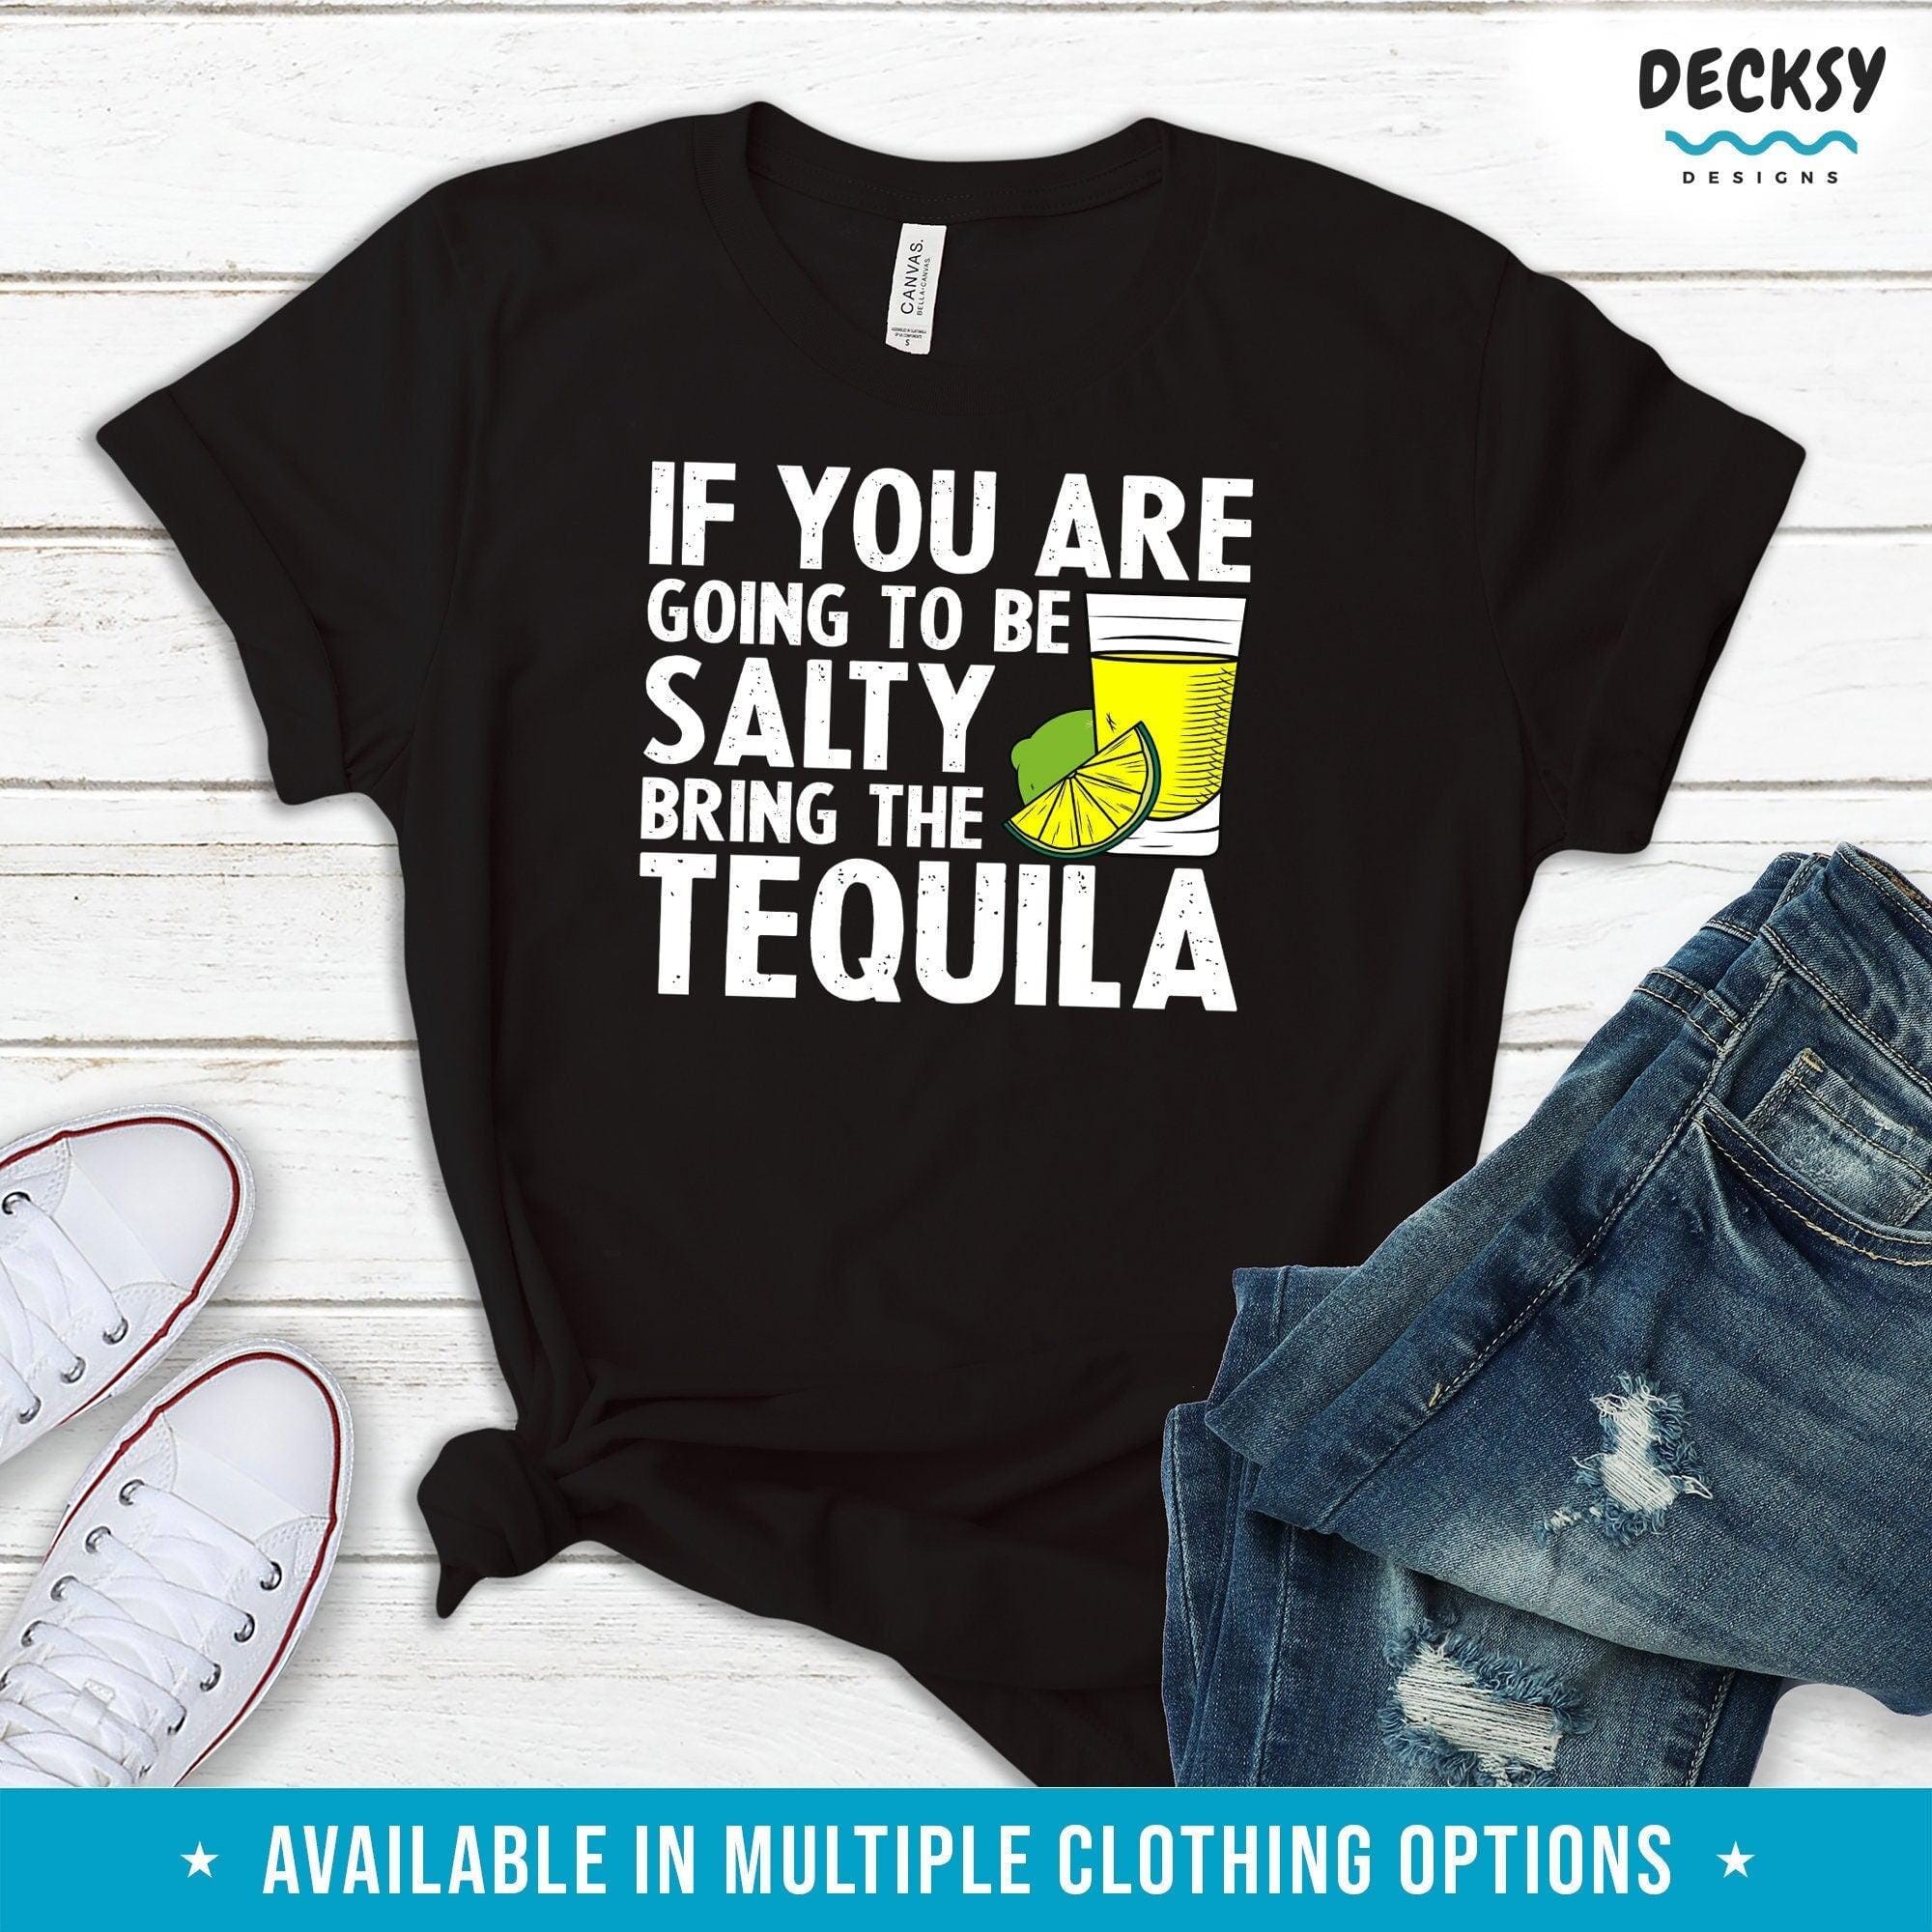 Tequila T Shirt, Sassy Party Gift-Clothing:Gender-Neutral Adult Clothing:Tops & Tees:T-shirts:Graphic Tees-DecksyDesigns